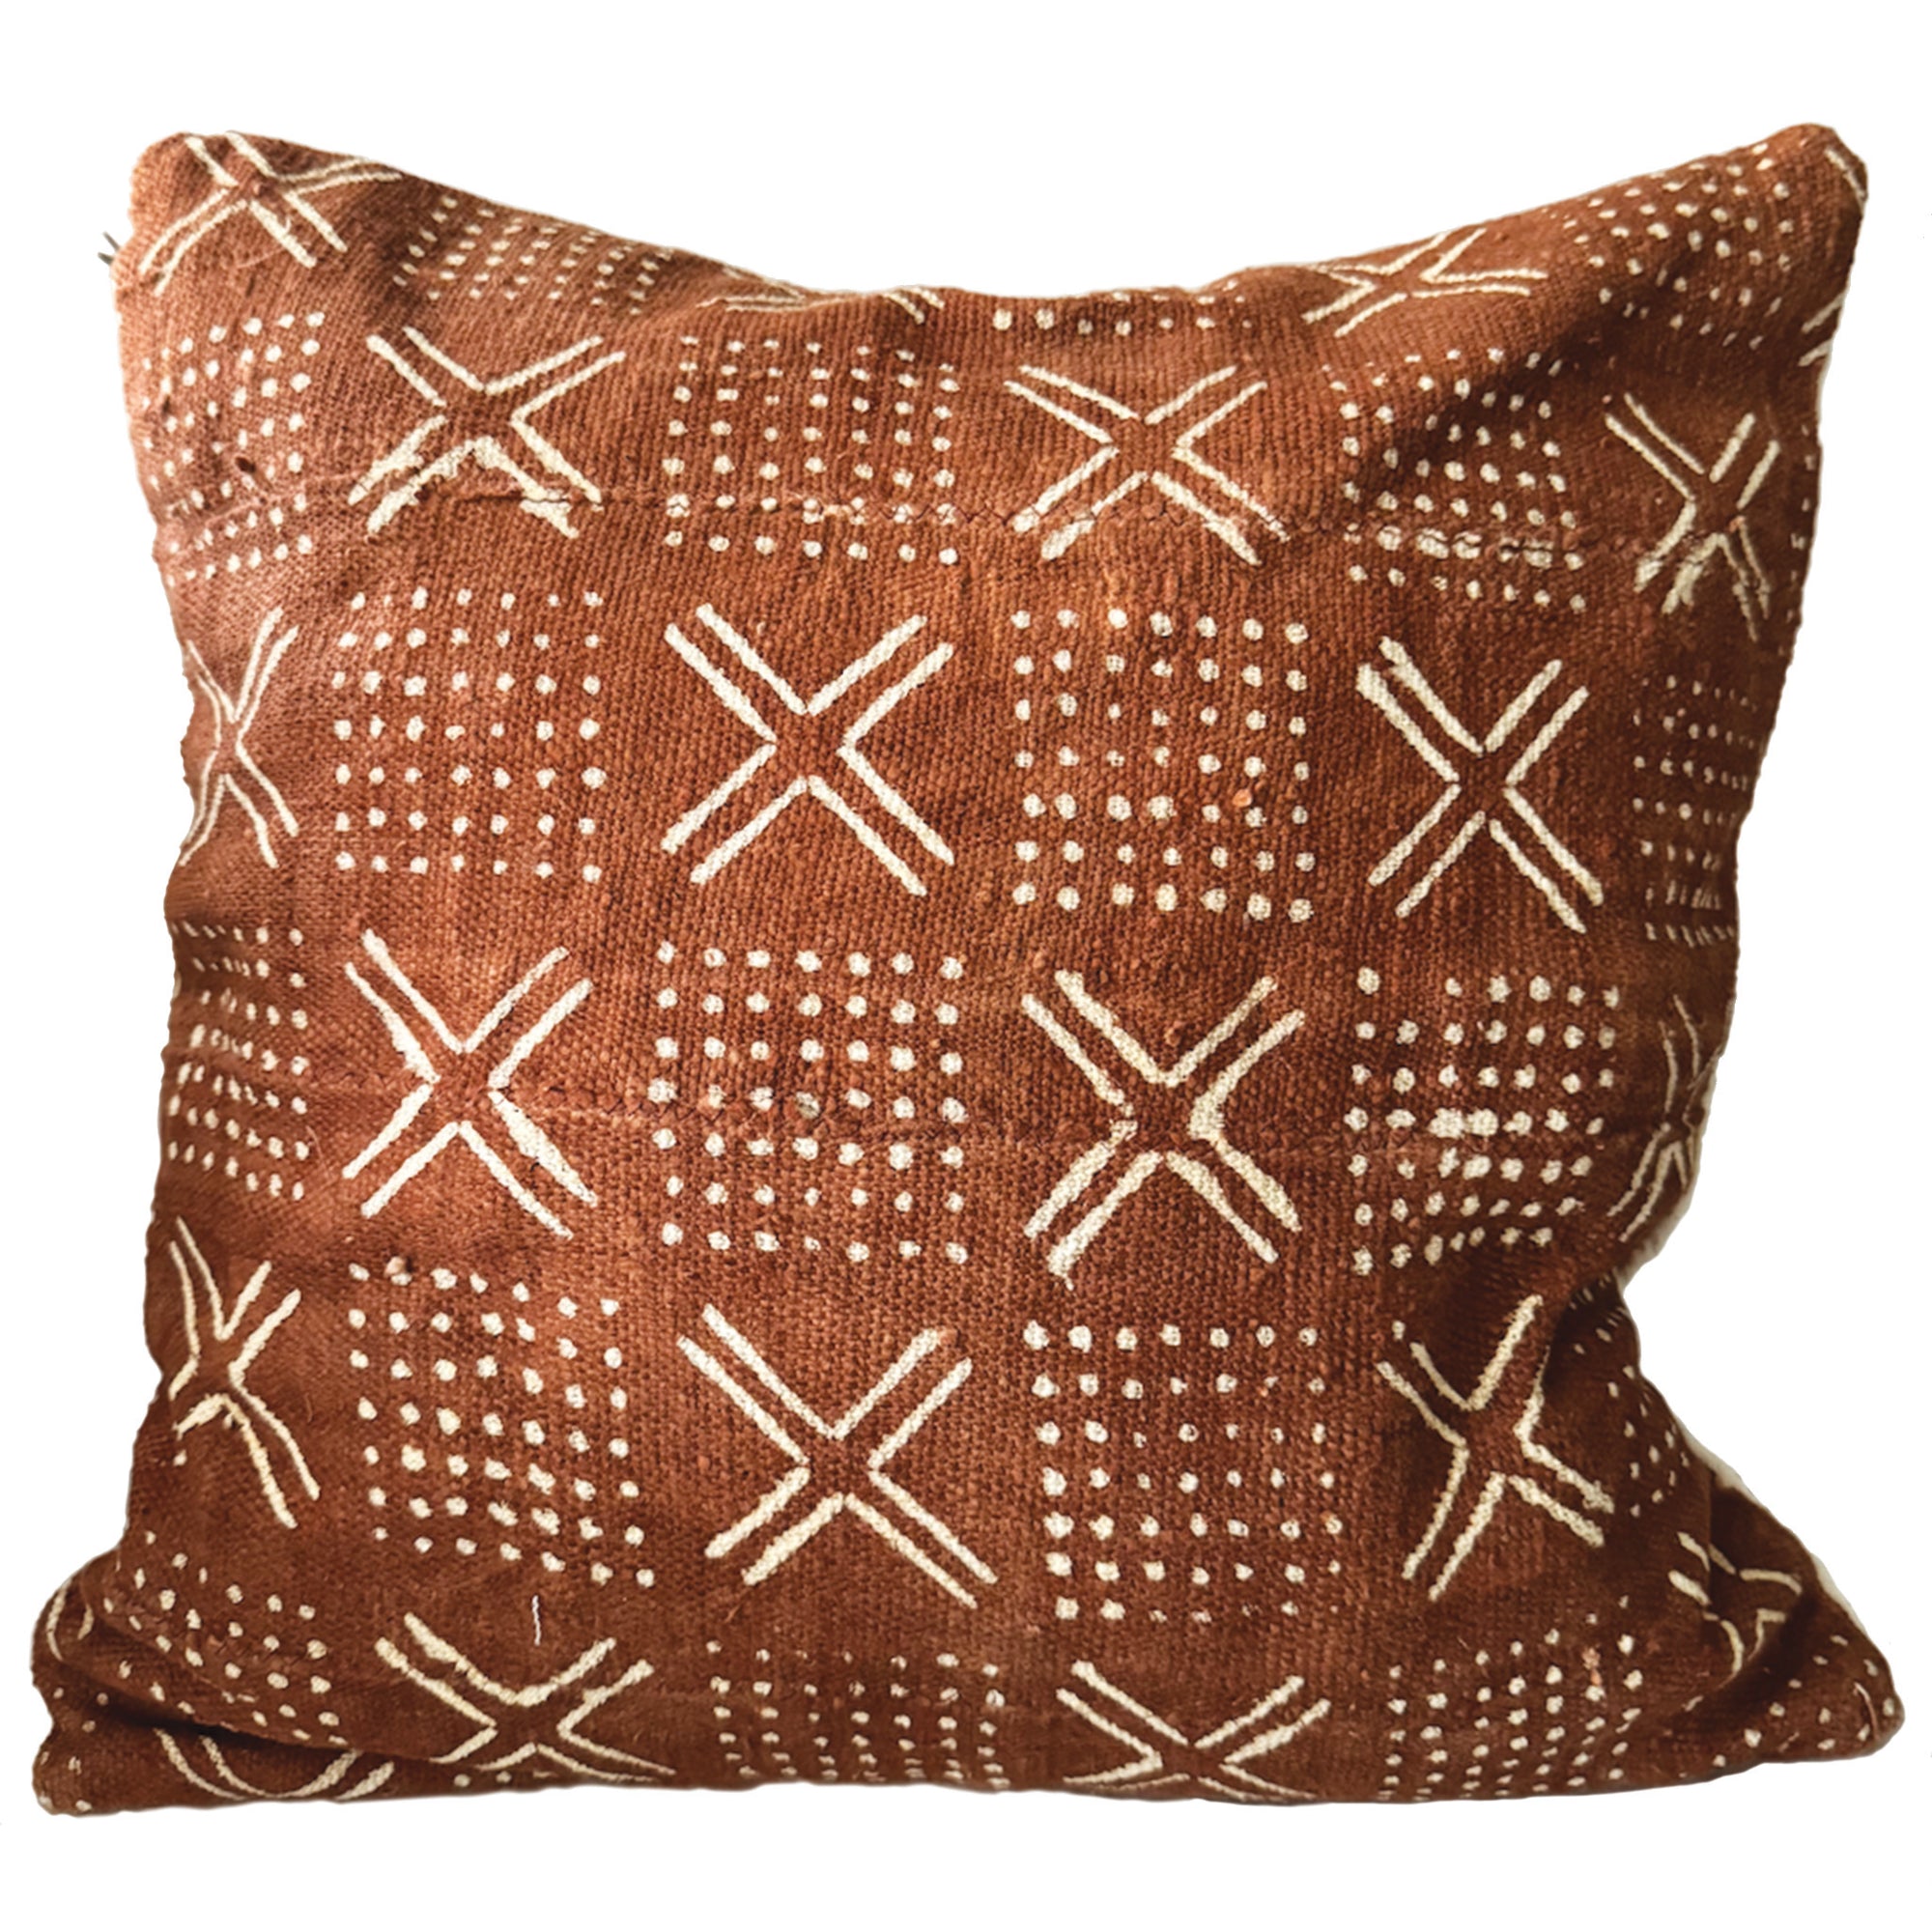 Mud Cloth Square Throw Pillow Cover - Rust